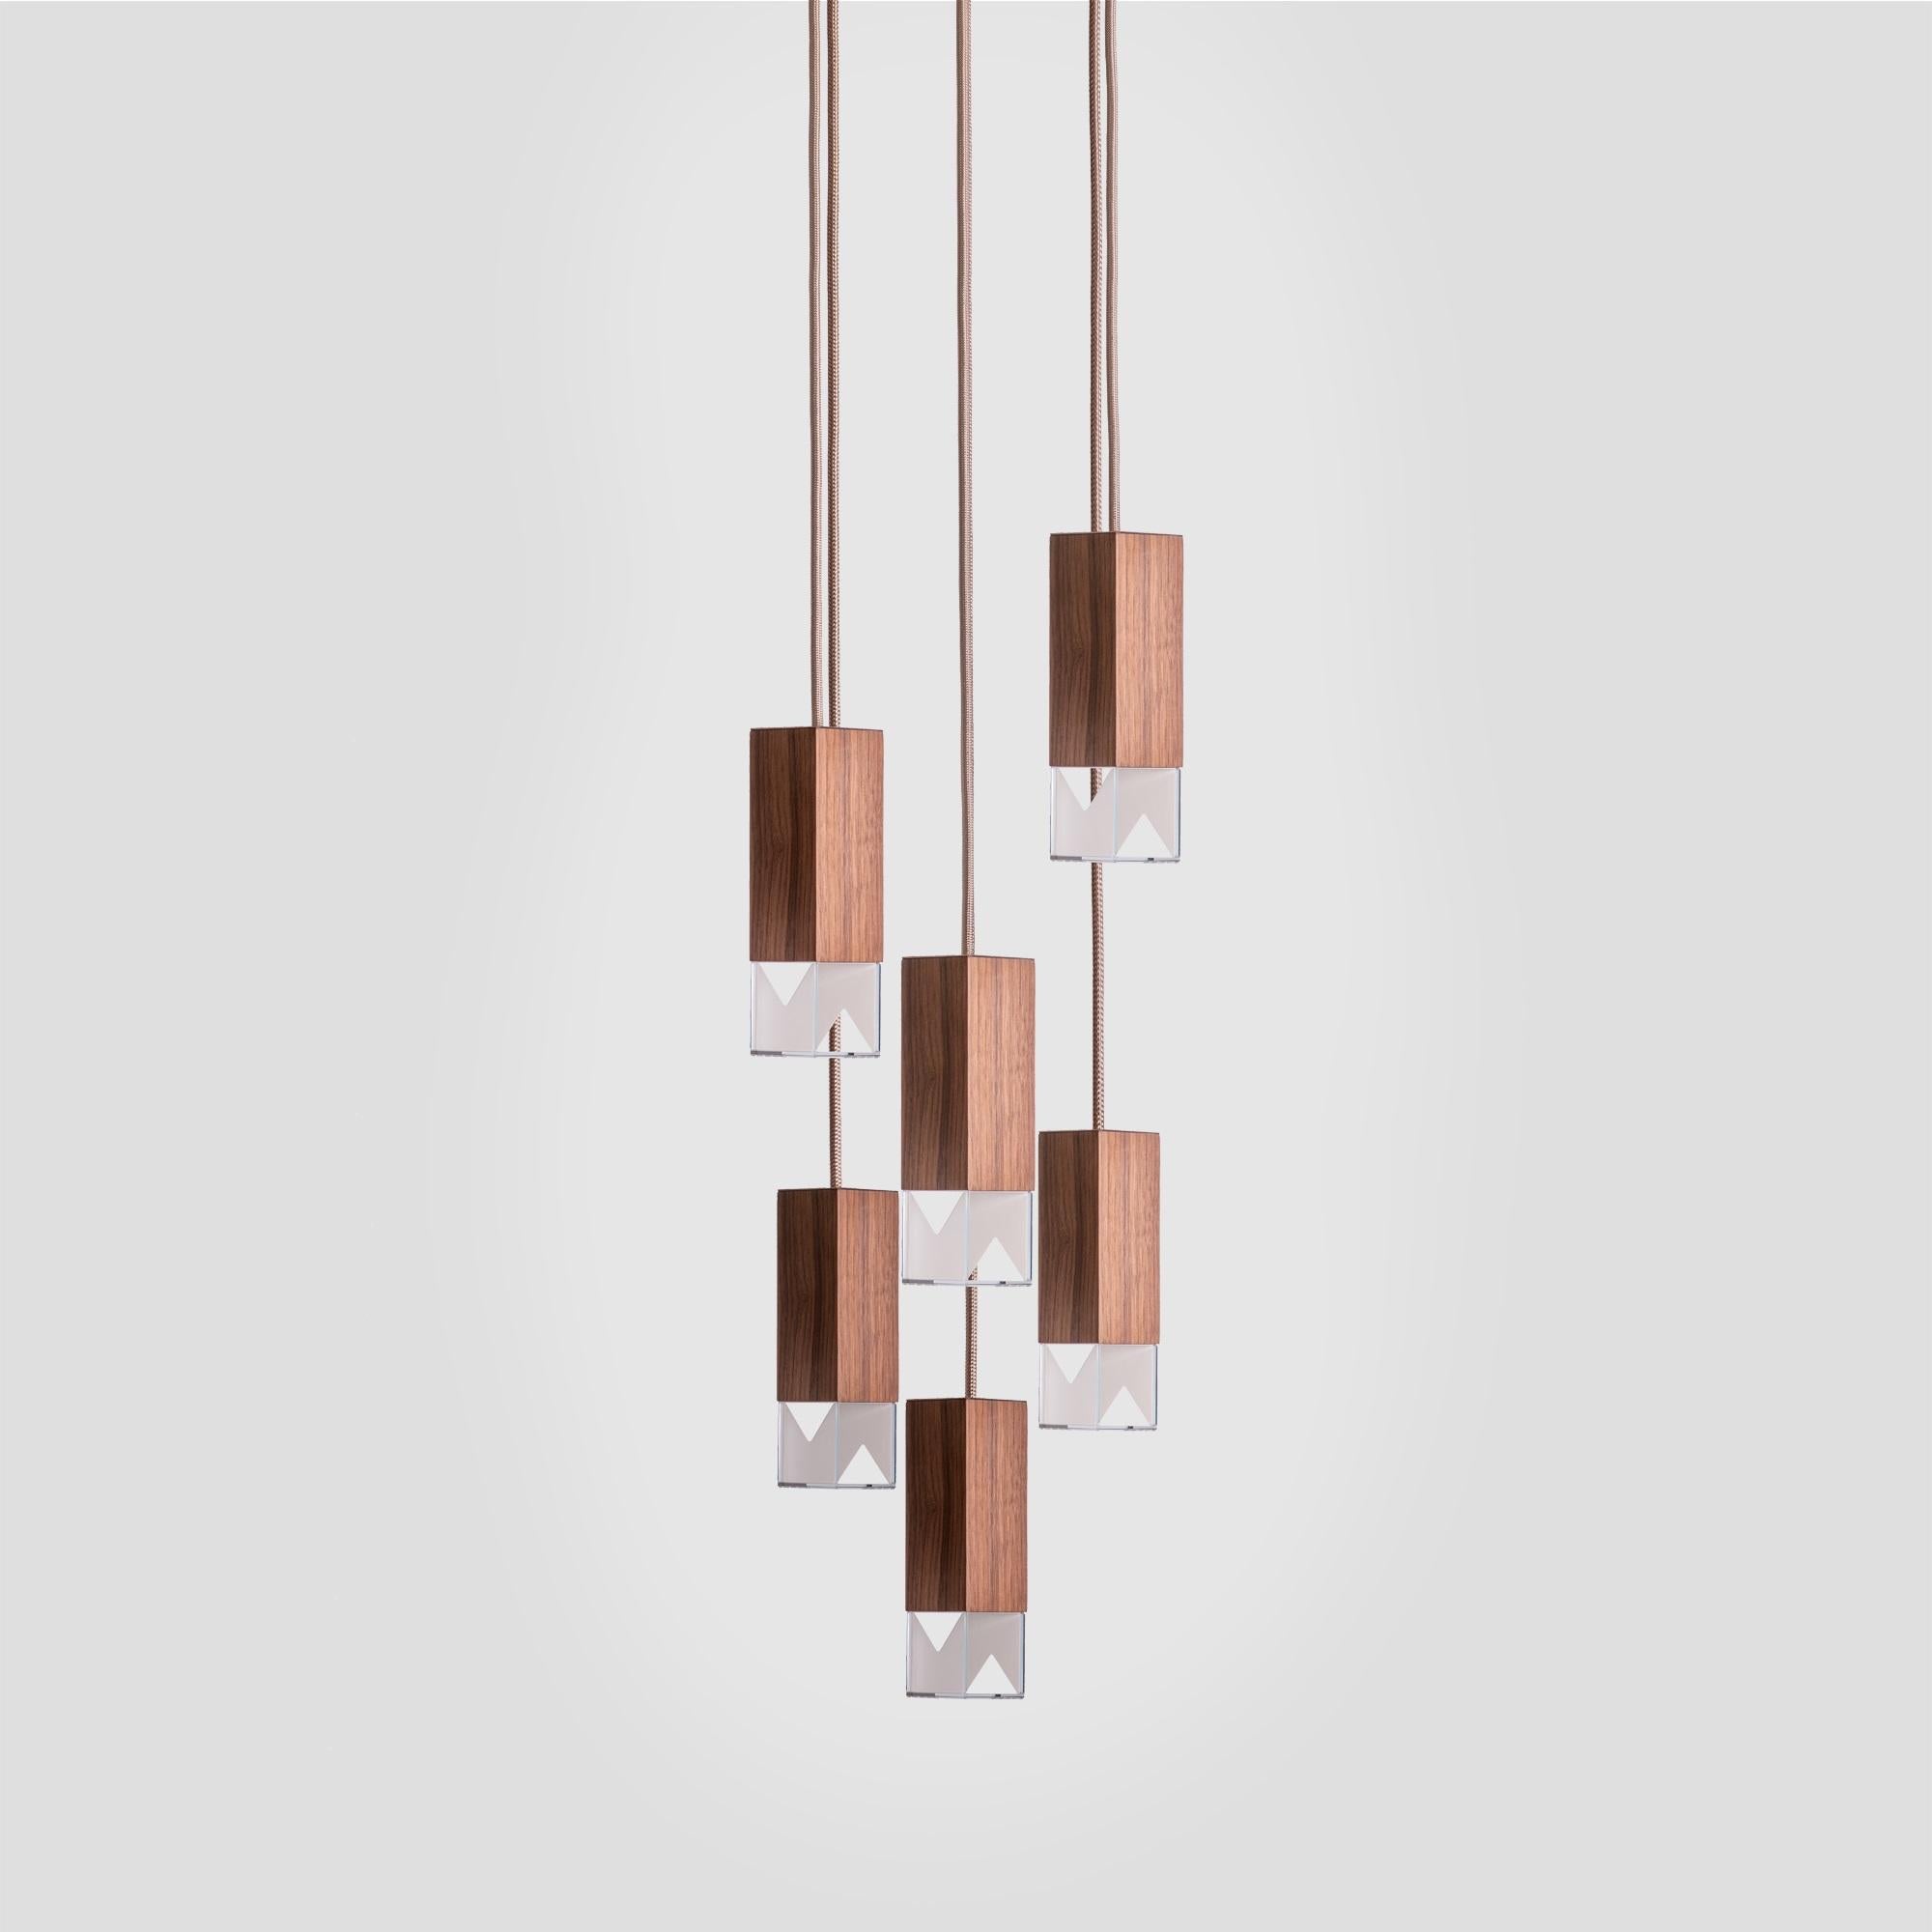 Combining a simple and elegant shape with prized materials, this modern and sophisticated chandelier features six pendants hanging from a square ceiling plate (30 x 30cm) of satin-finished brass at different lengths from adjustable fabric cables (2m